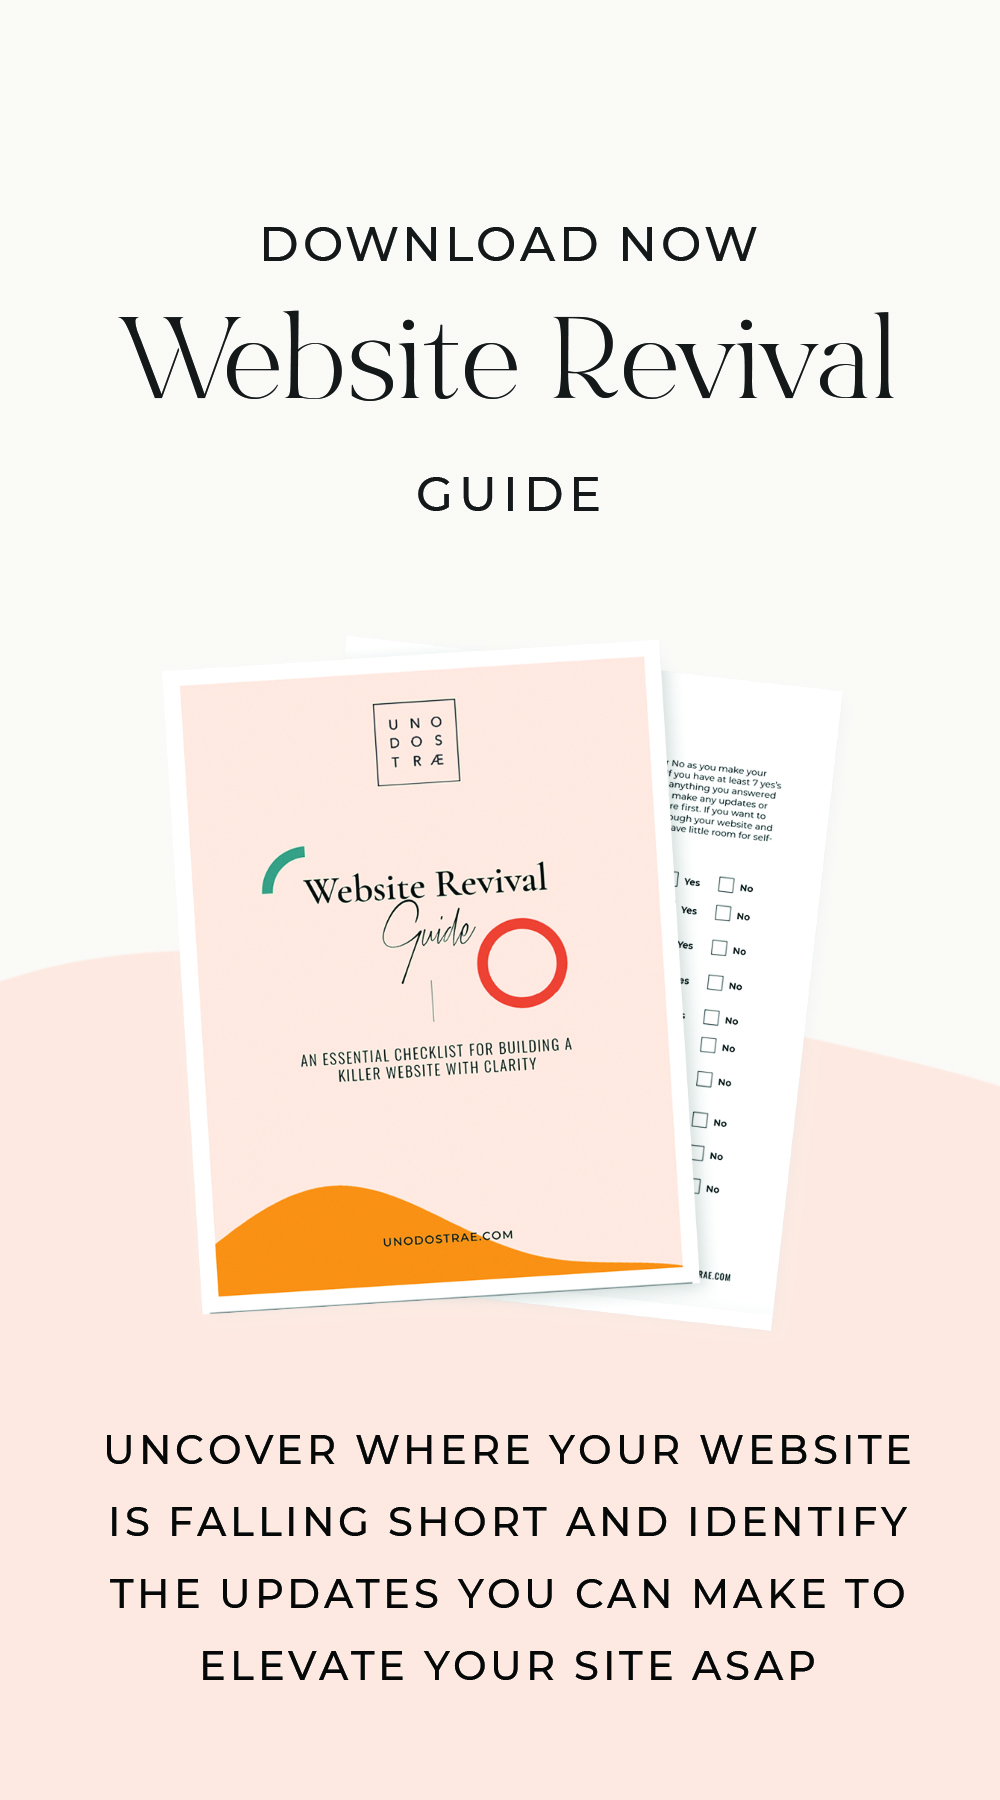 Download the FREE Website Revival Guide by Uno Dos Trae